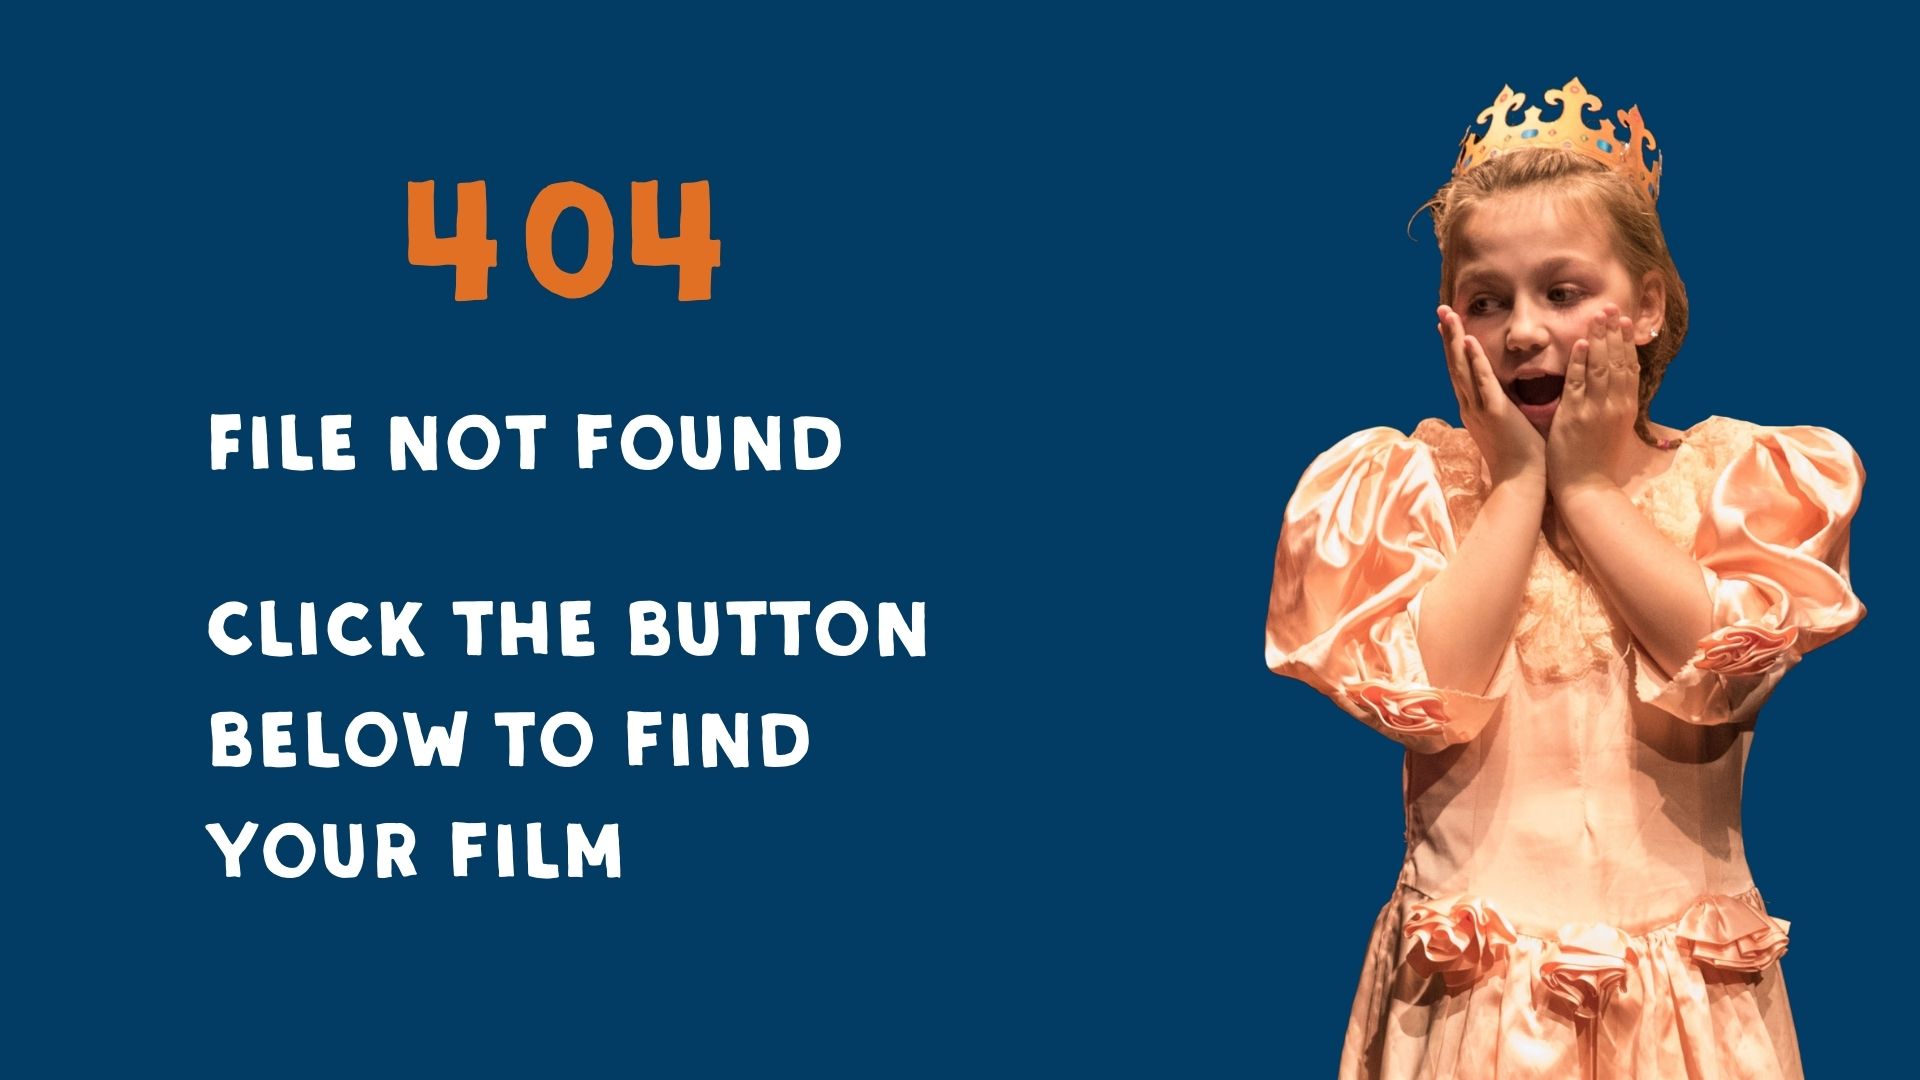 404 - File not found. Click the button below to find your film..